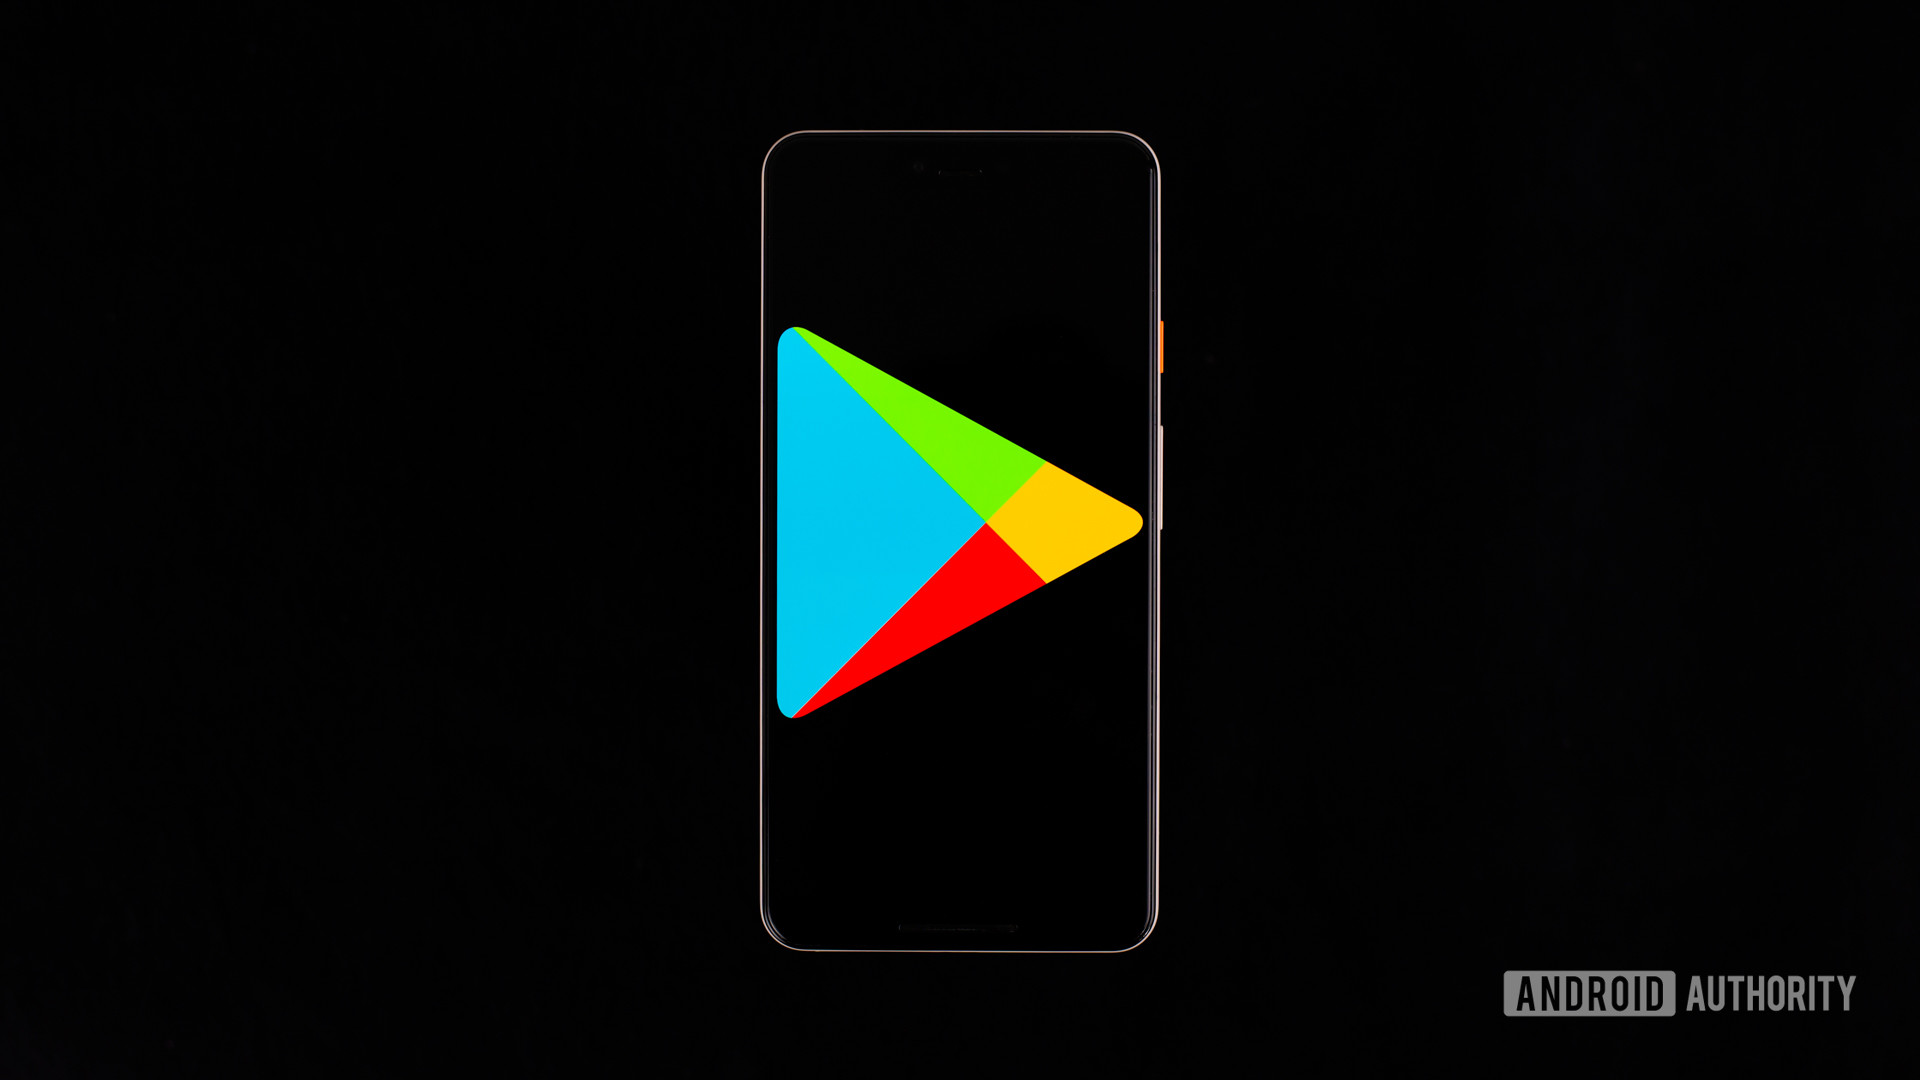 Google Play Store on smartphone stock photo 1 - Download text messages backup apps